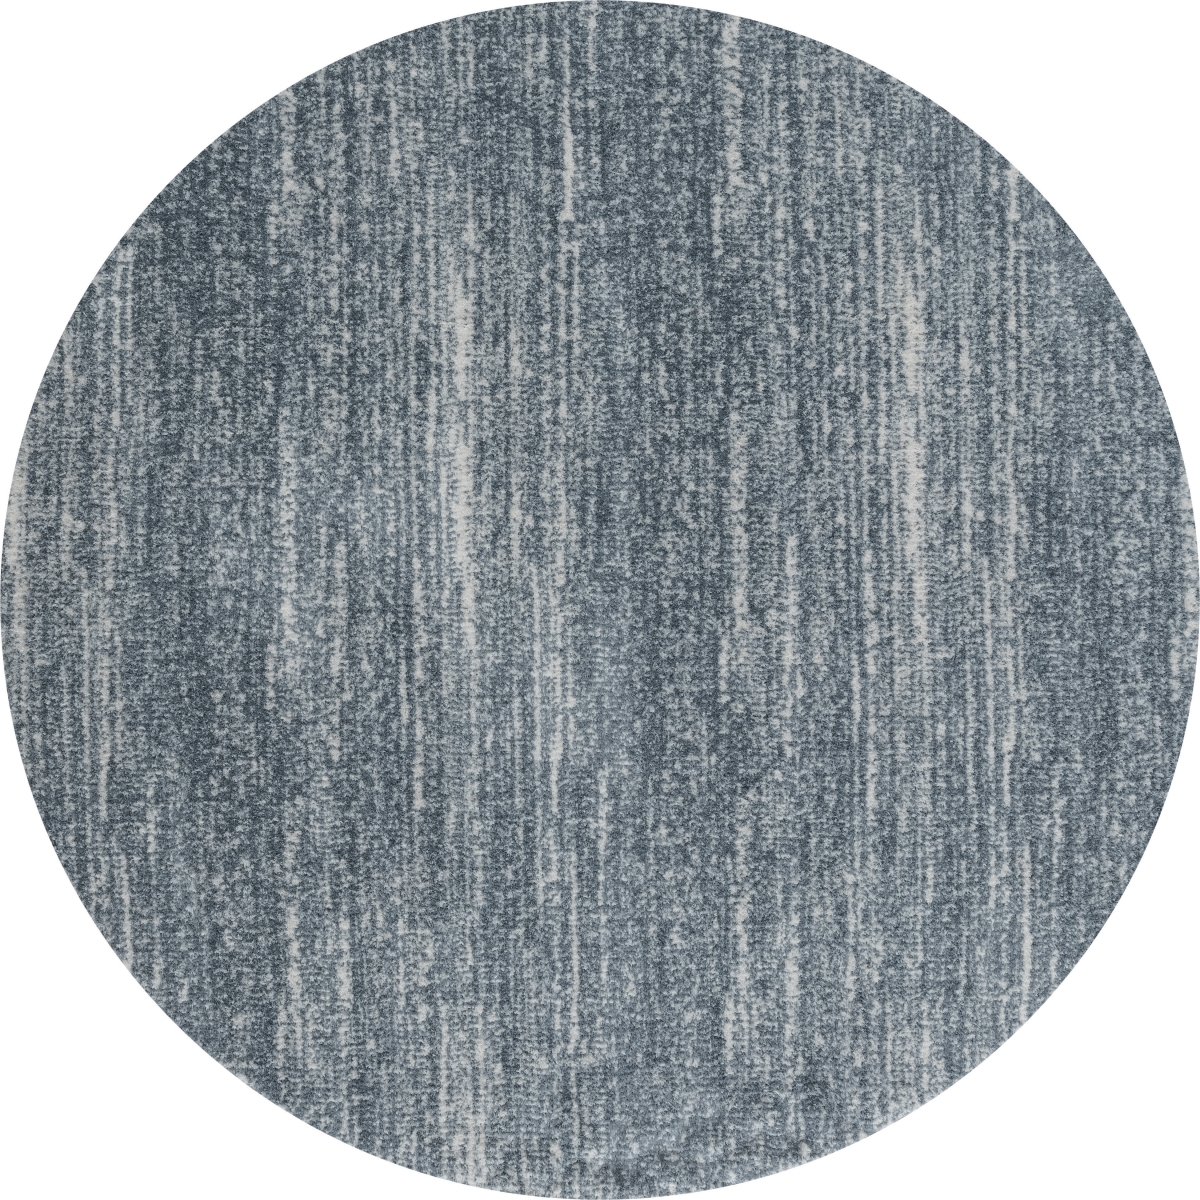 1840 20867 88r 7 Ft. 10 In. X 7 Ft. 10 In. Tranquility Zuelia Blue & Gray Round Rug